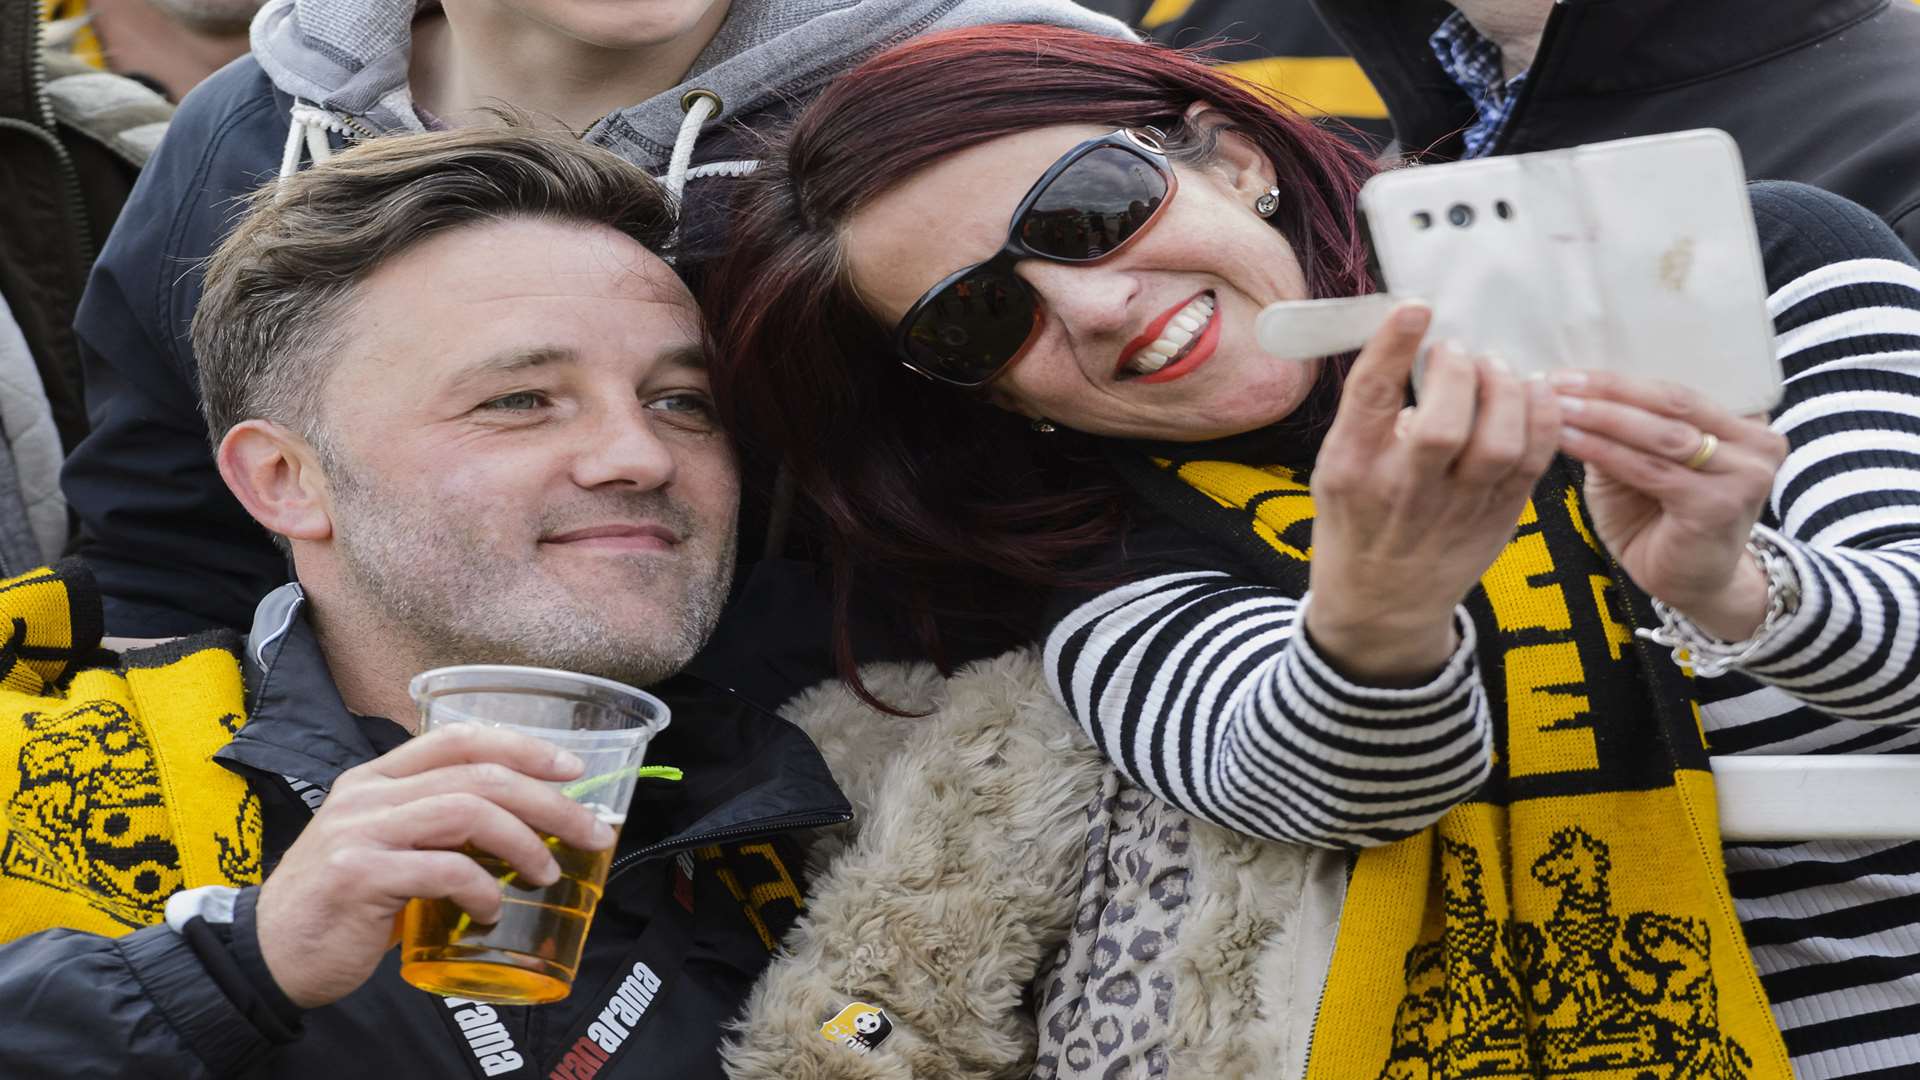 Pint and a selfie - how to celebrate by Maidstone boss Jay Saunders. Picture: Andy Payton